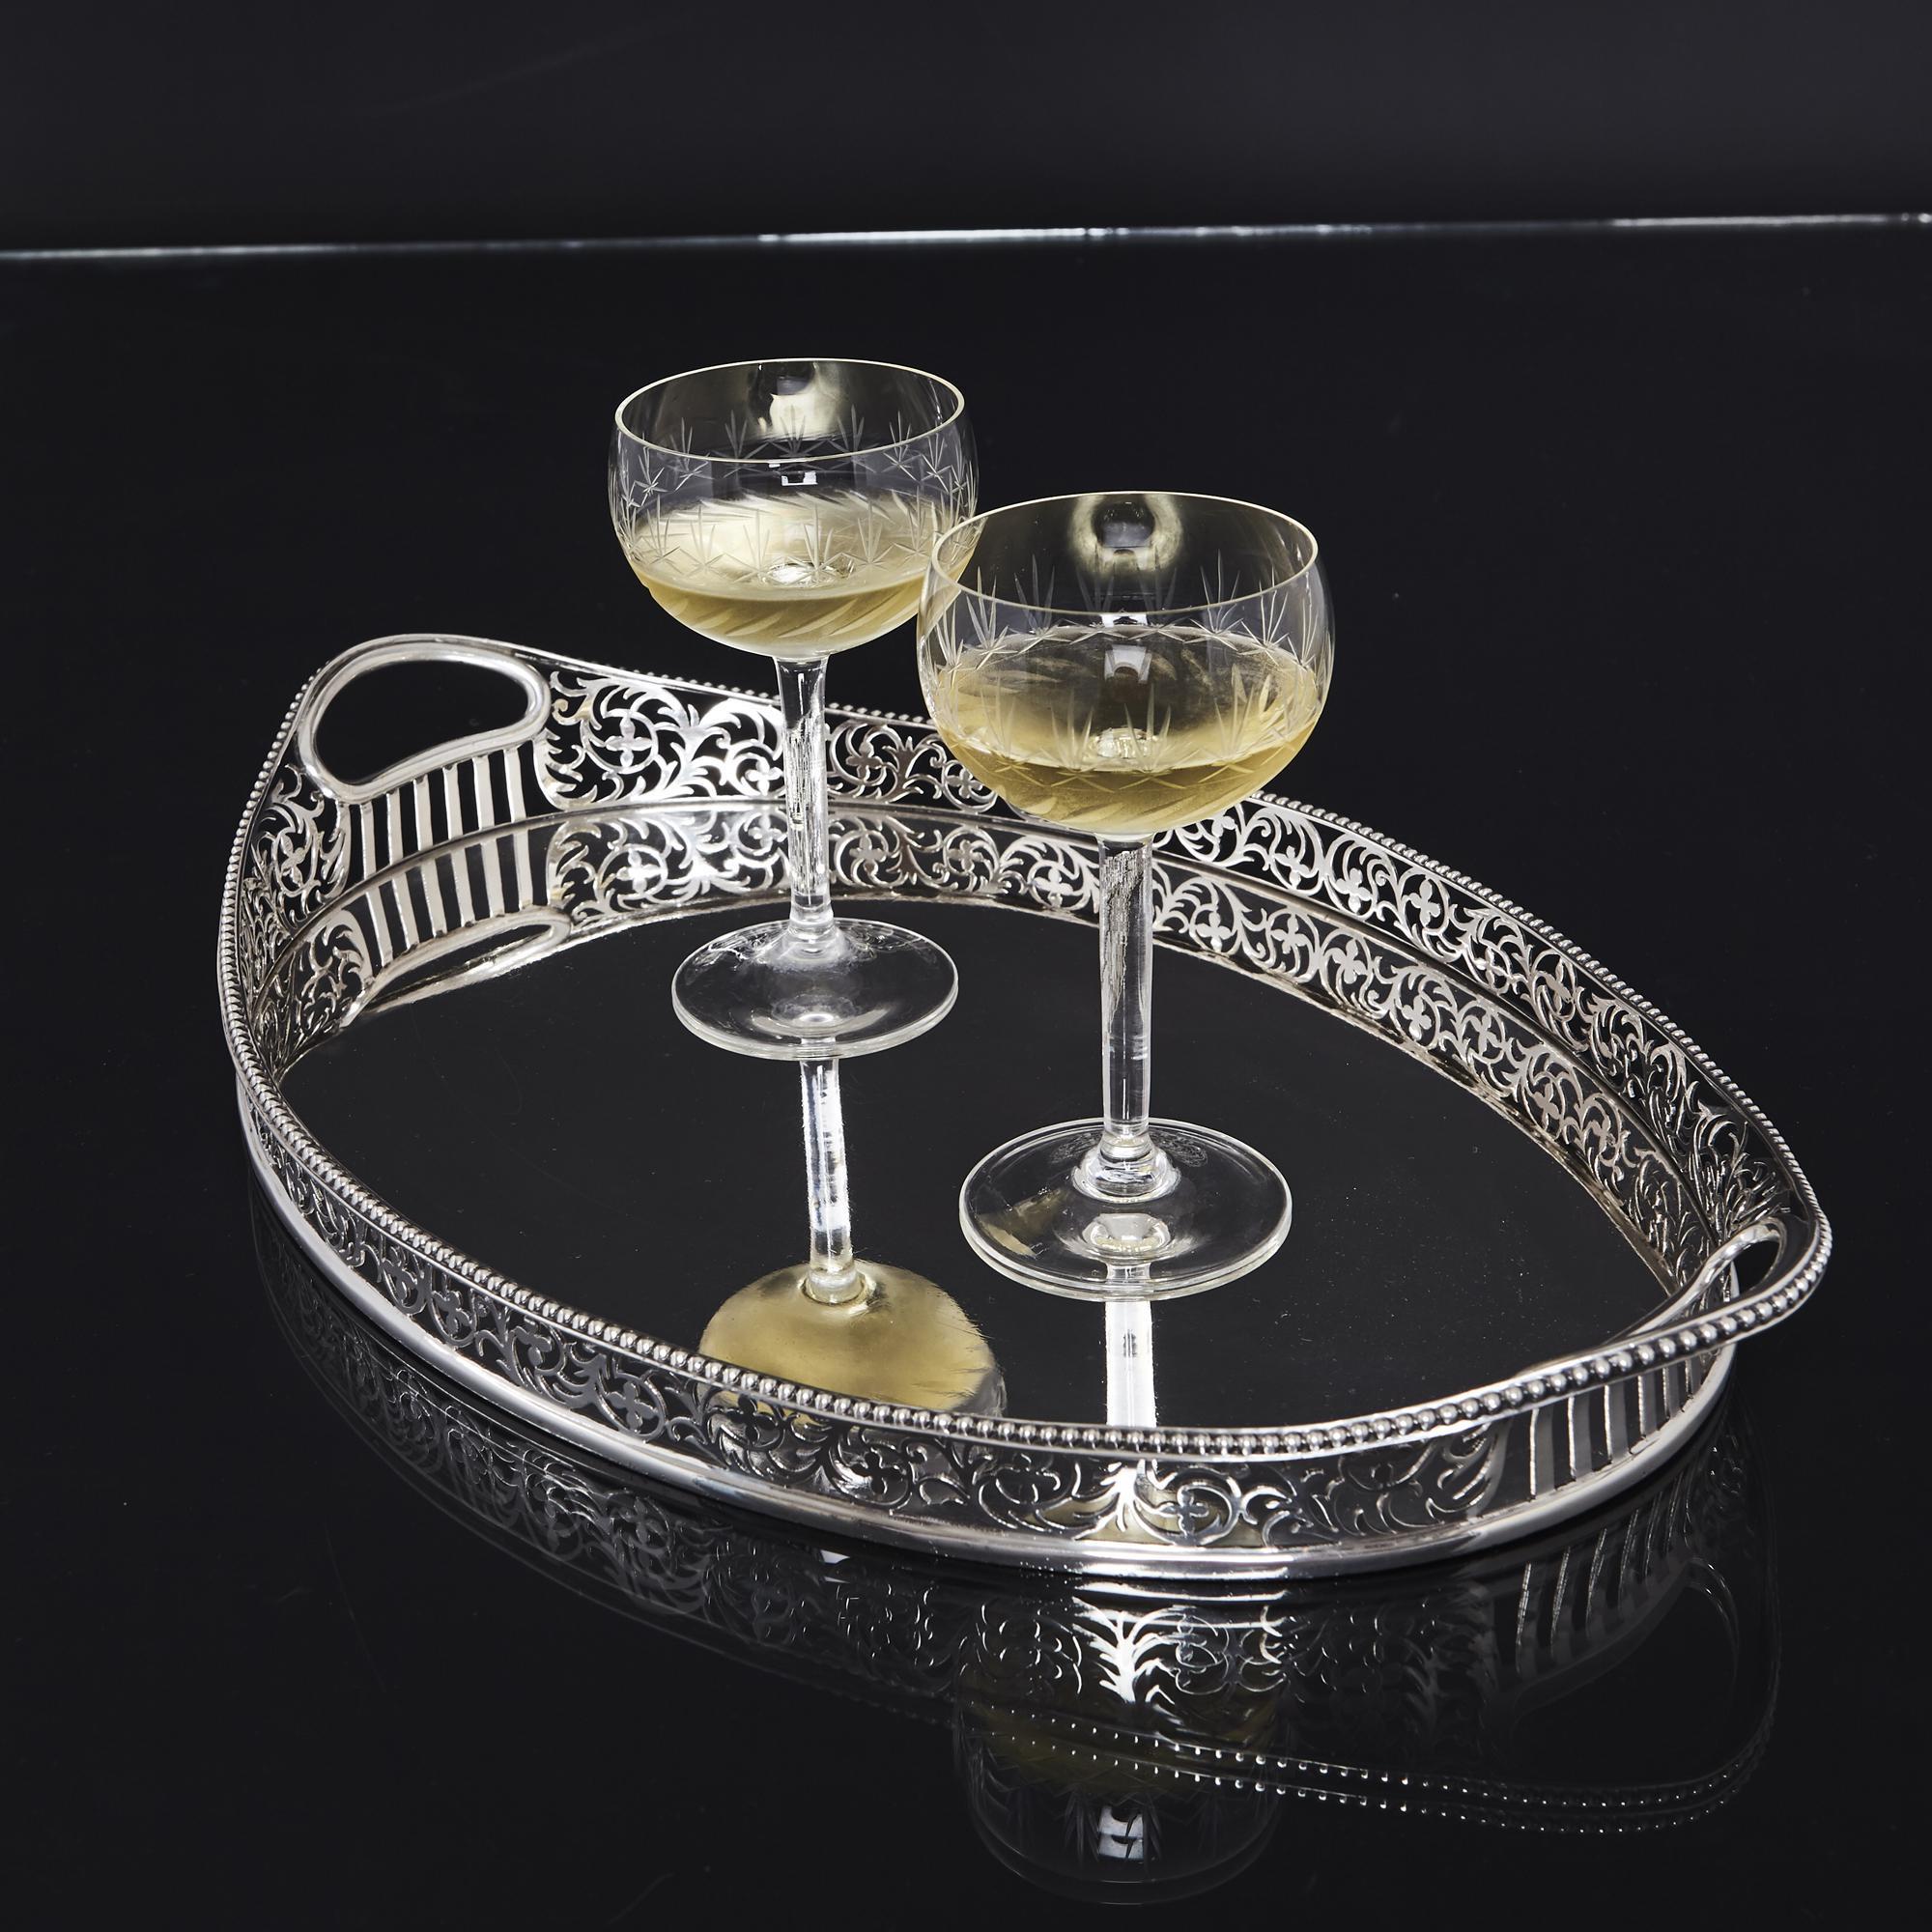 A fine quality antique sterling silver gallery tray of oval form, with a beautifully hand-pierced border. This elegant pattern incorporates a scrolling foliate design and is finished with a crisp bead edging. The handles are cut from the gallery and